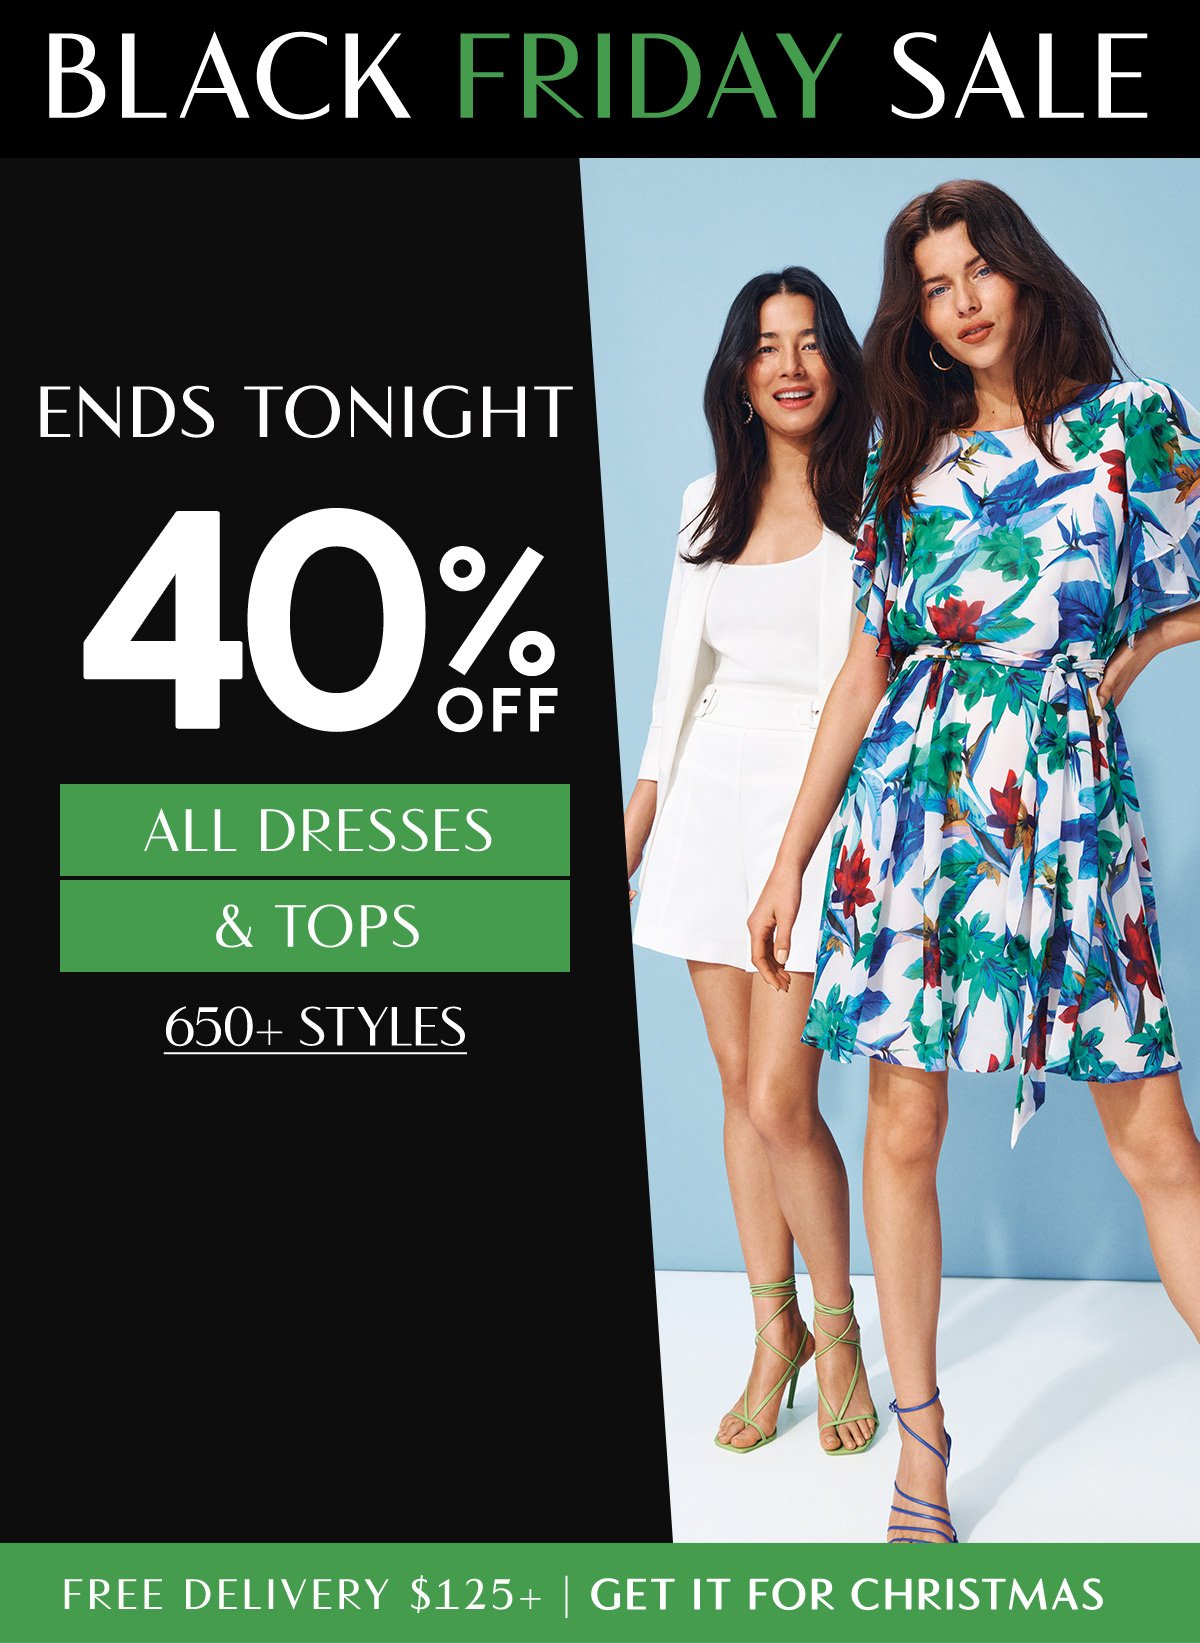 BLACK FRIDAY SALE. Ends tonight. 40% off all dresses & tops. 650+ styles